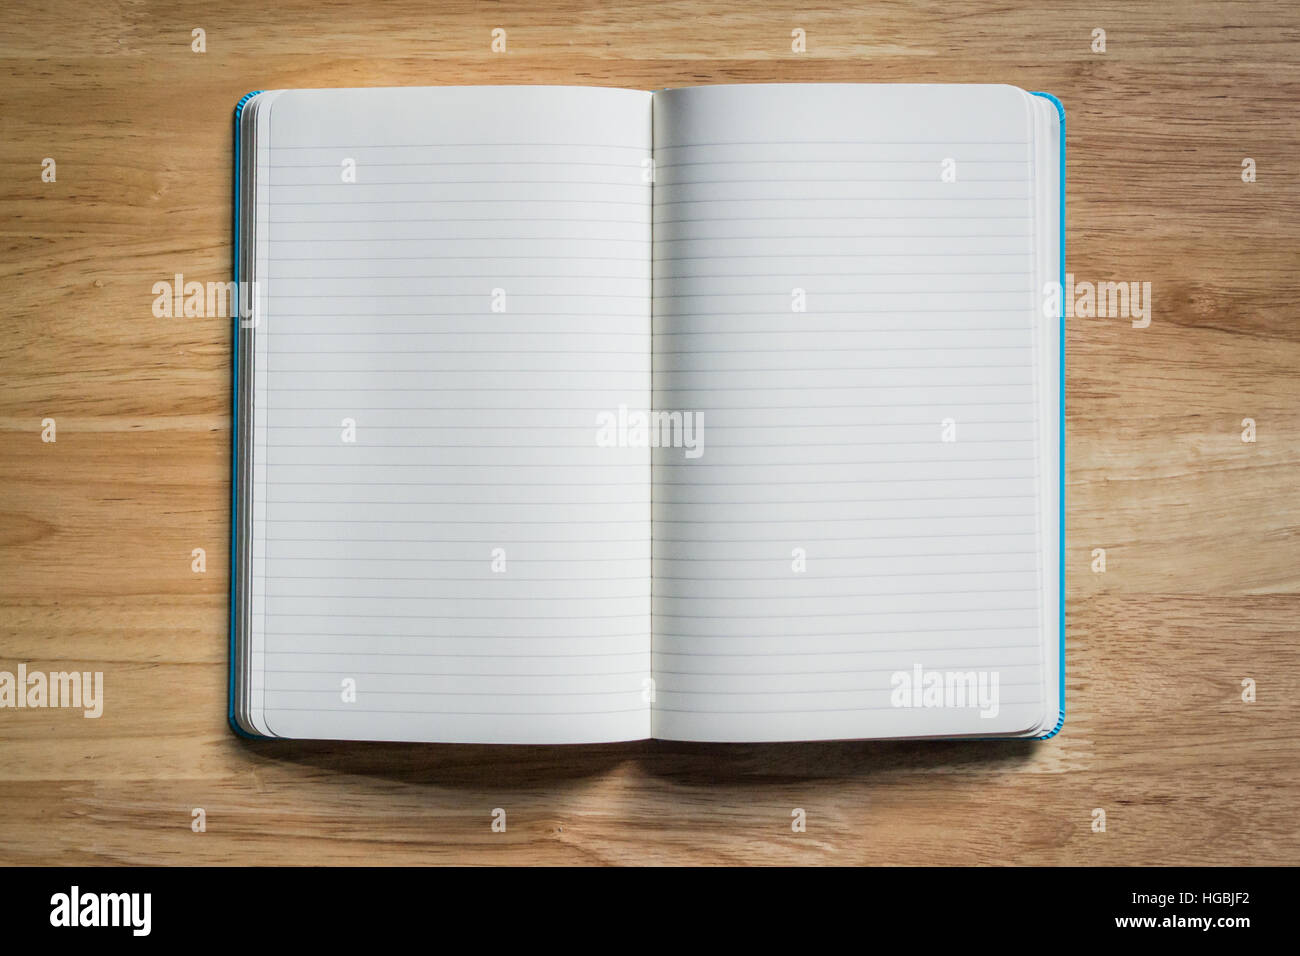 Blank Notebook on Wooden Table Stock Photo